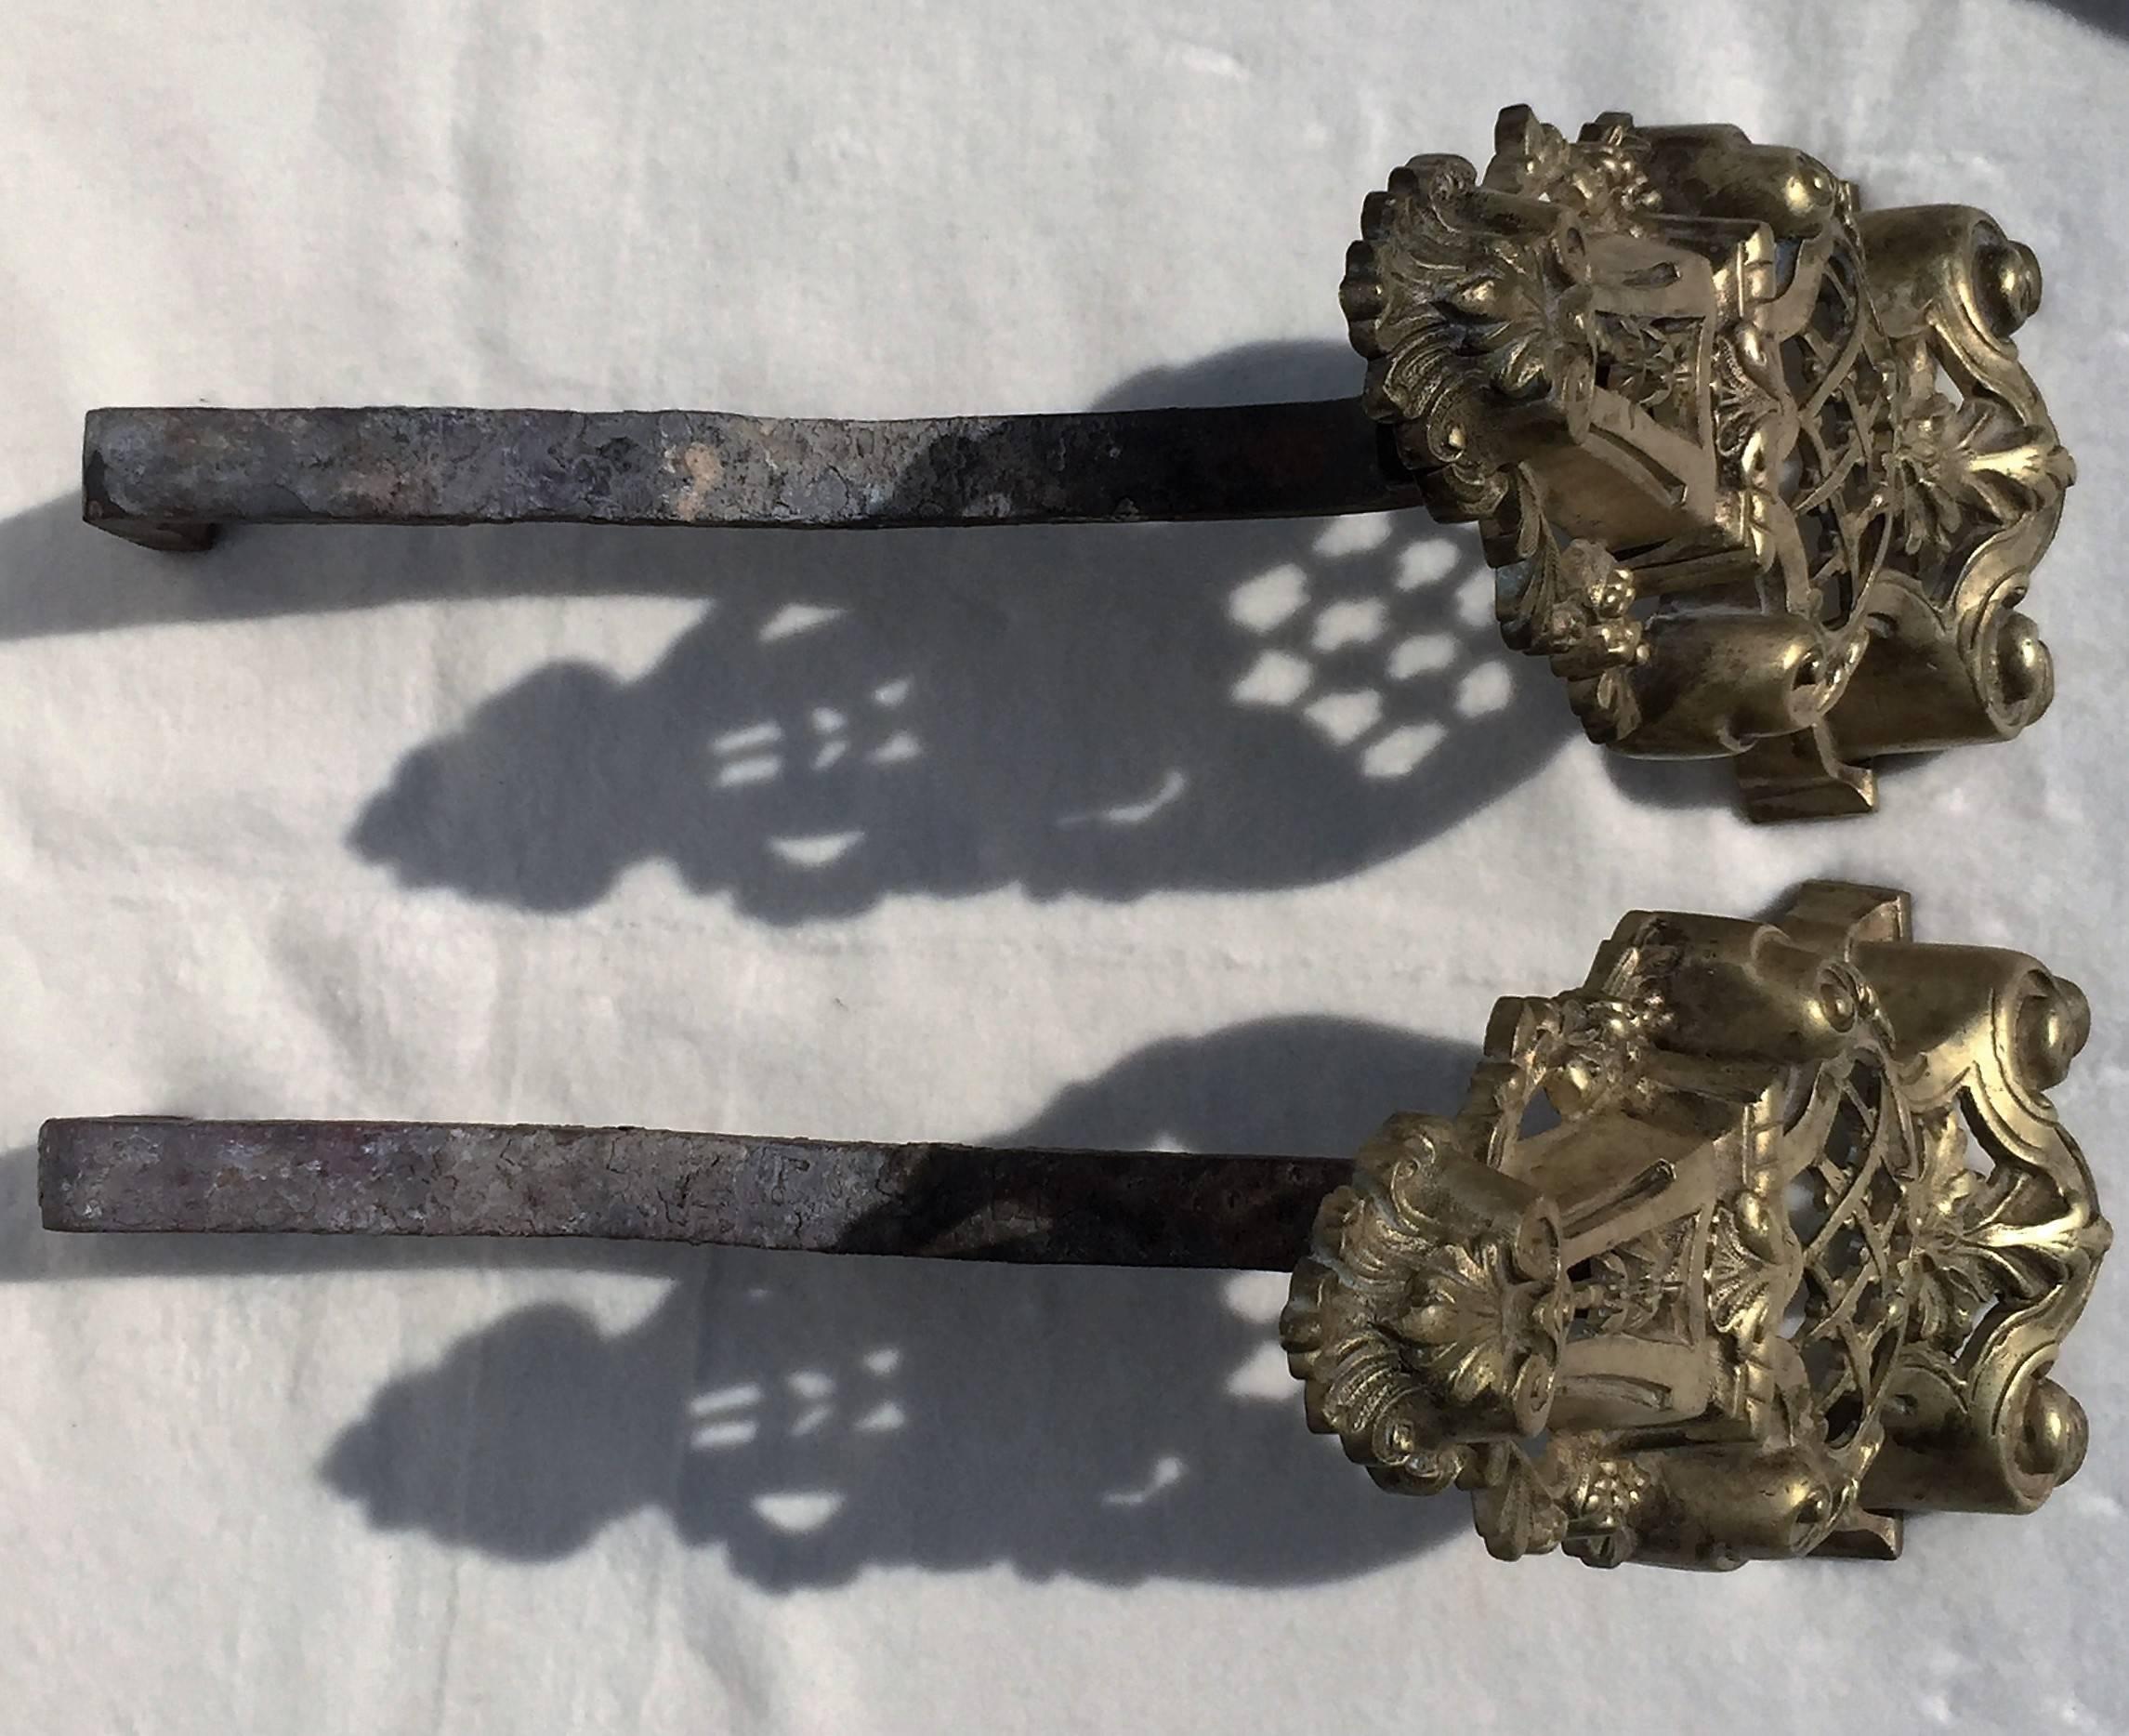 French Louis XV Rococo style 19th century bronze andirons, fire dogs, chenets, 1860-1880. 
They have been cleaned professionally. 
It's having a screw to adjust the angle of the iron rack.
Provenance from a French chateau.